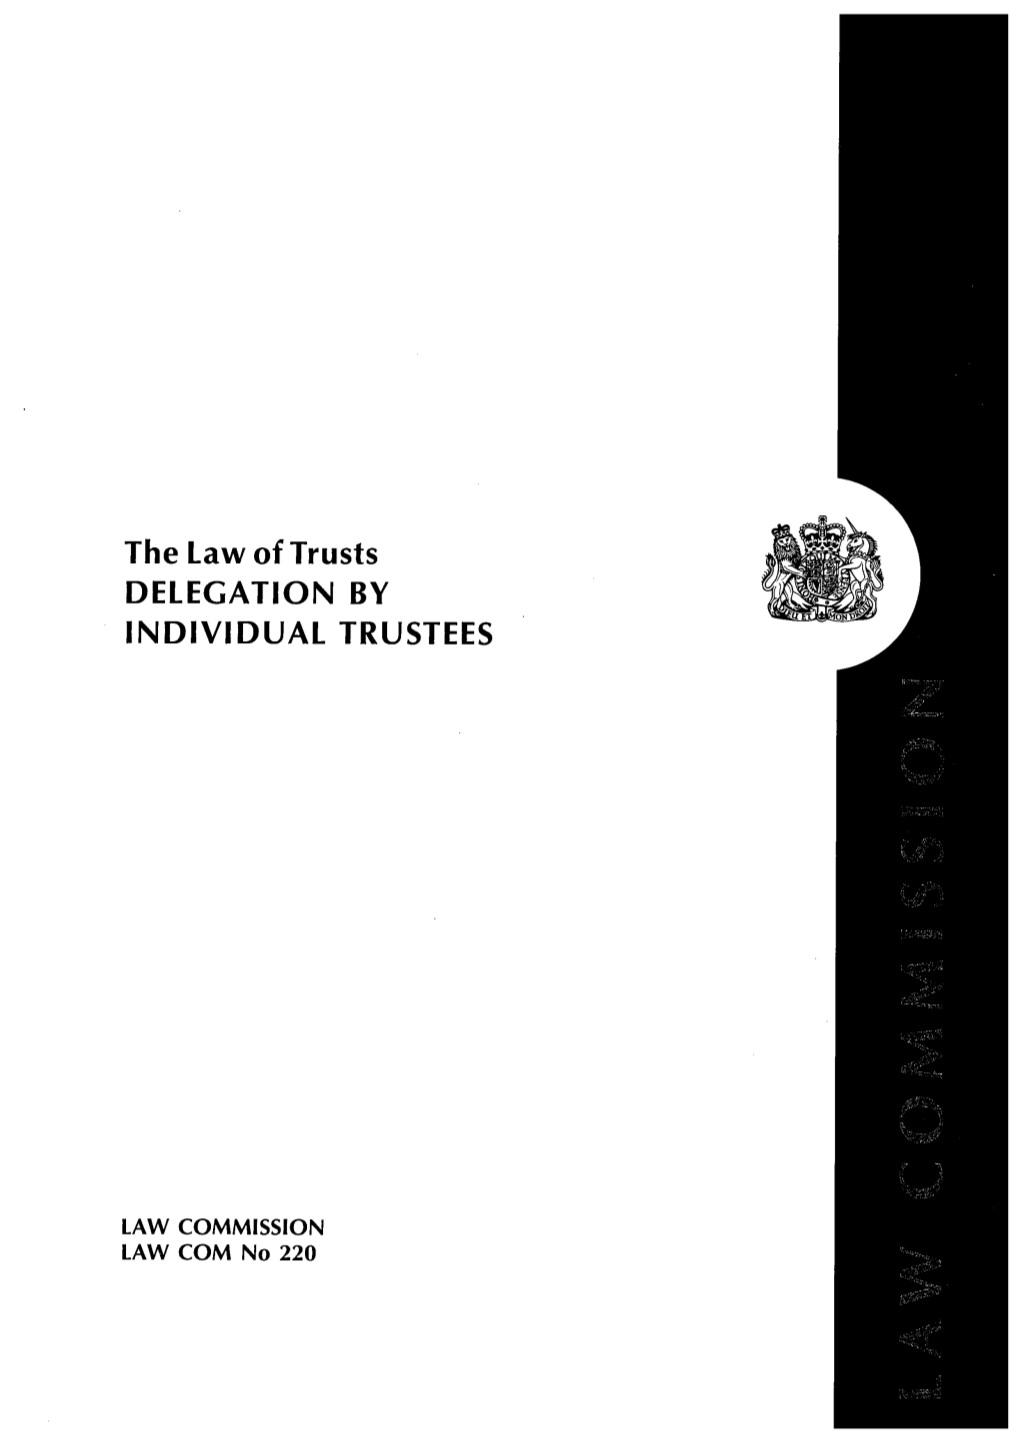 The Law of Trusts DELEGATION by INDIVIDUAL TRUSTEES